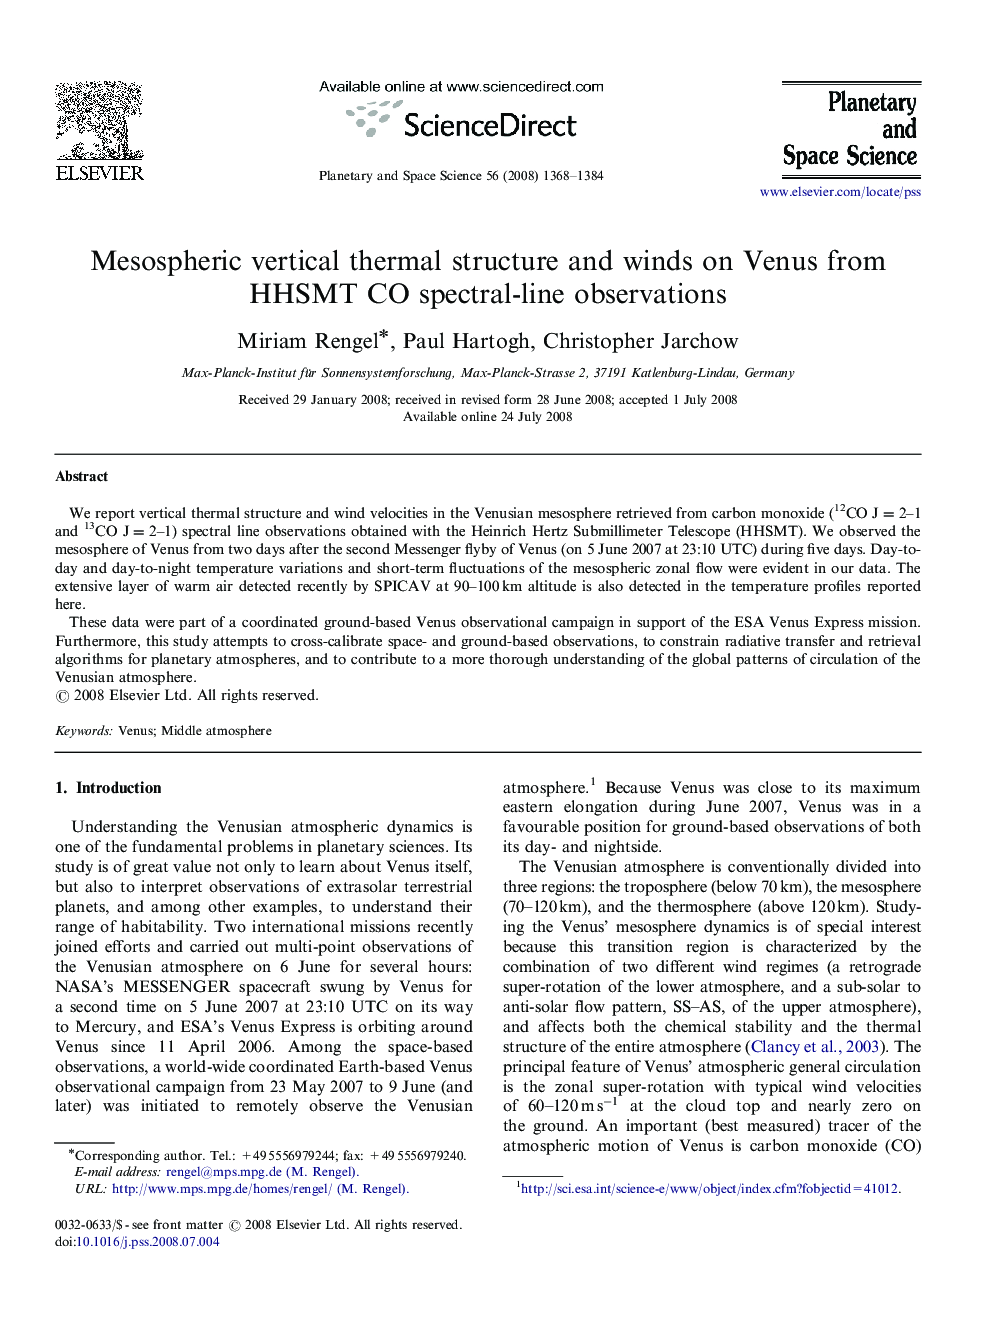 Mesospheric vertical thermal structure and winds on Venus from HHSMT CO spectral-line observations